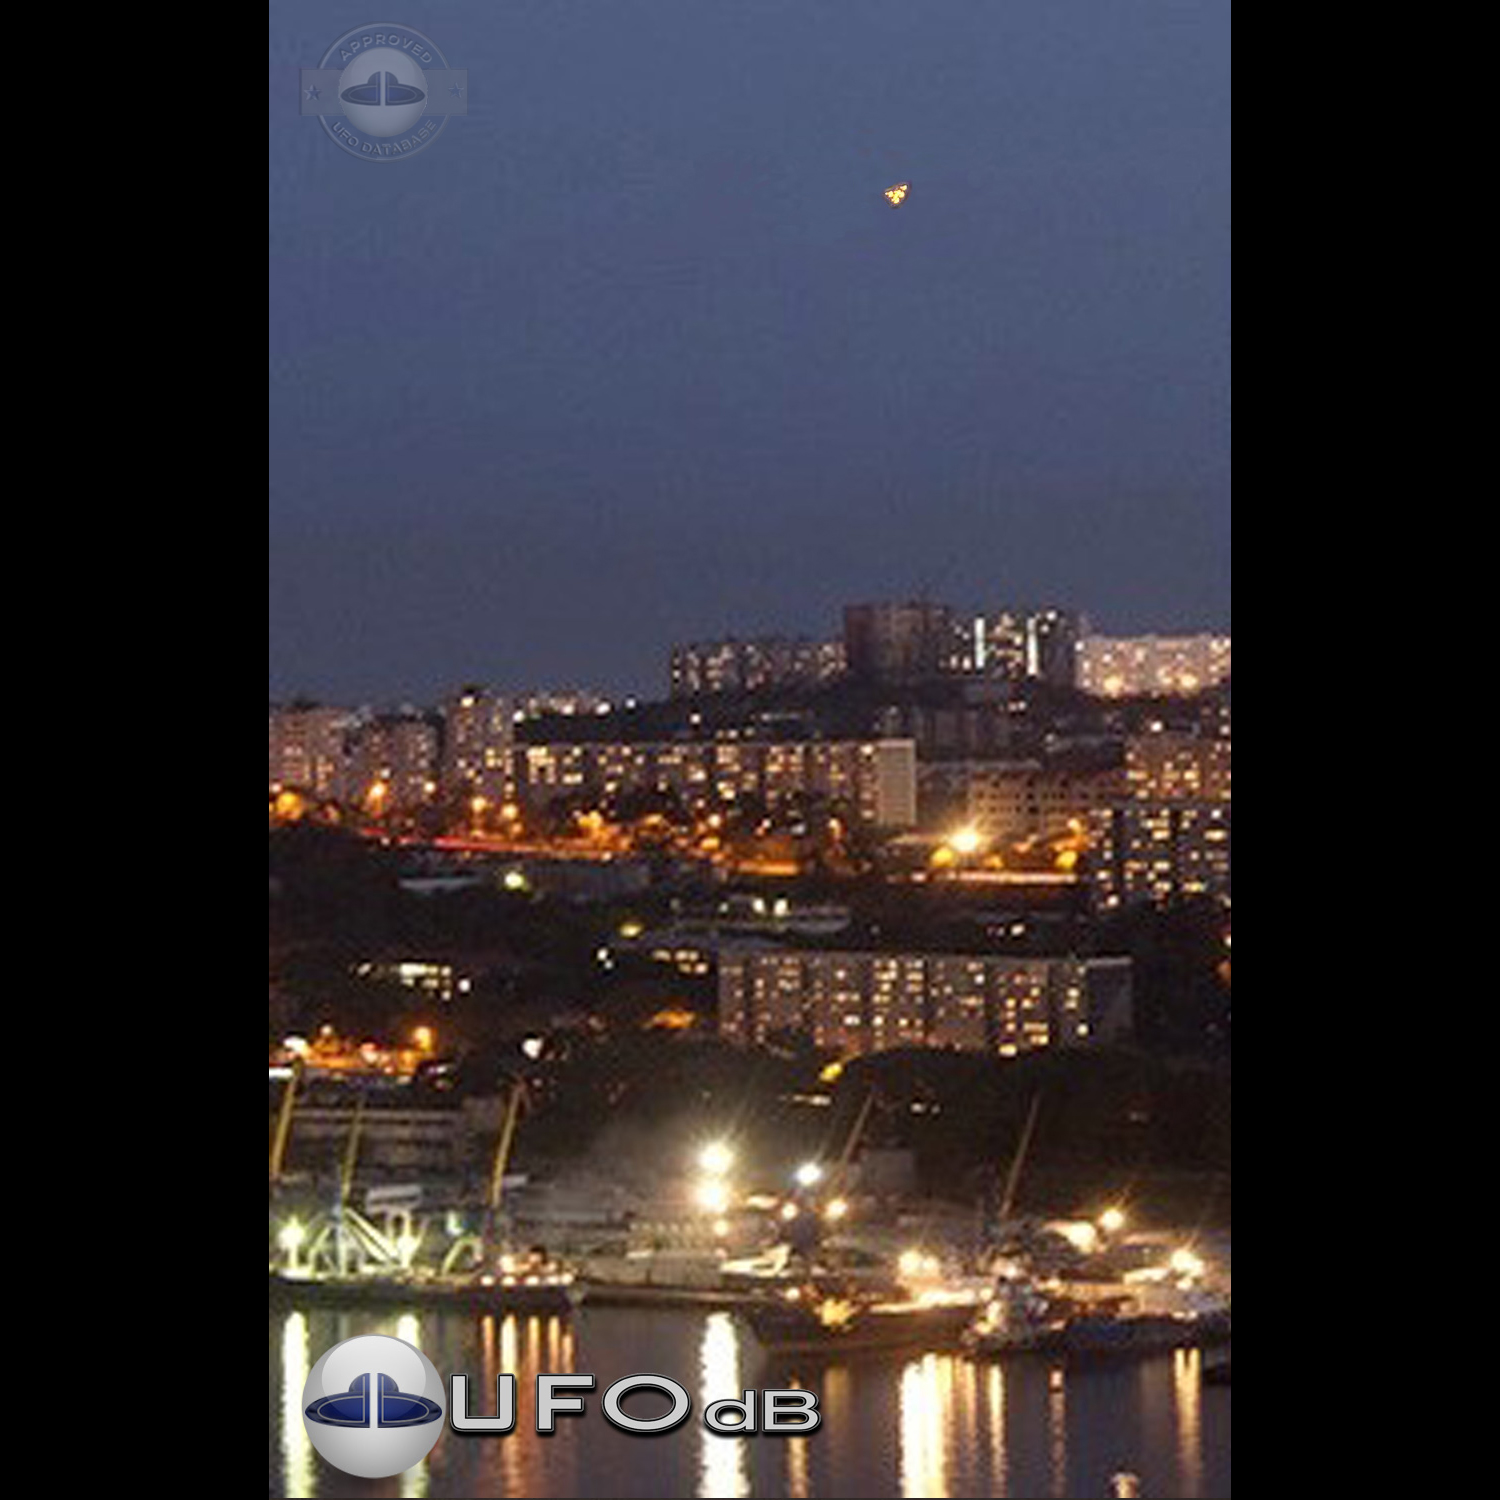 UFO seen by hundreds in Vladivostok | Russia UFO picture | 2010 UFO Picture #167-1